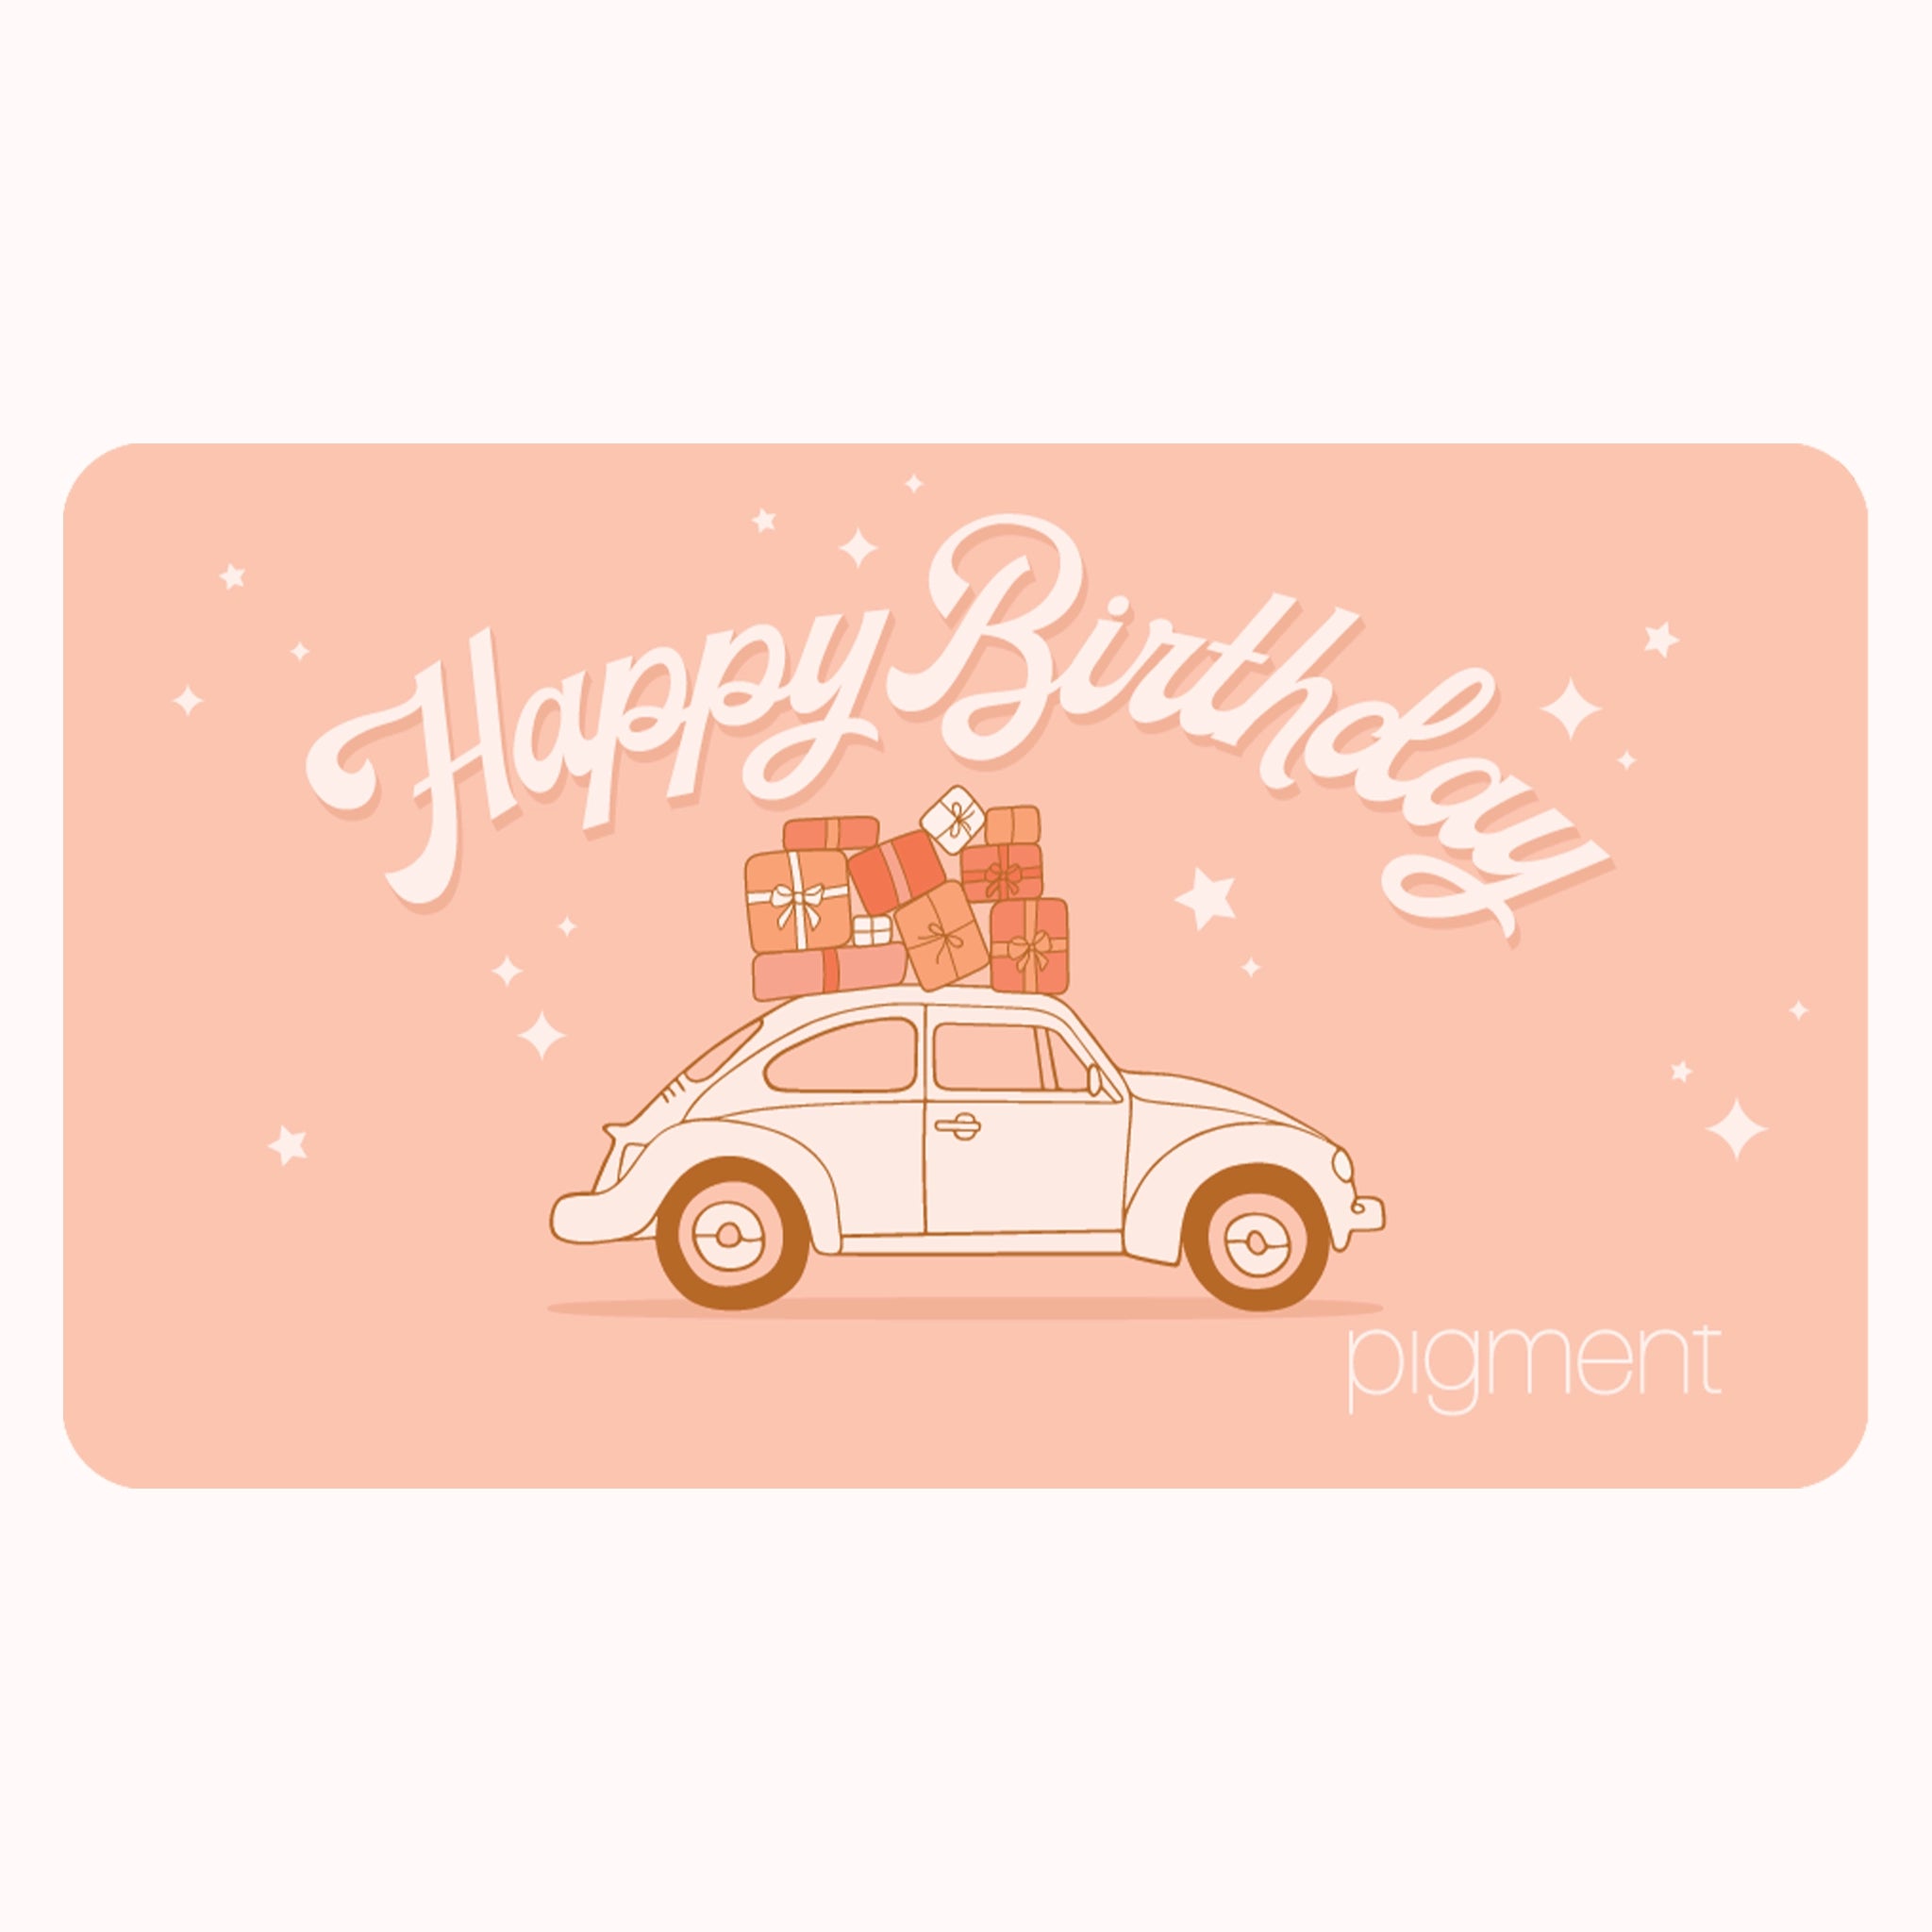 On a white background is a pink gift card with a graphic of a VW bug with gifts on top along with white text above that reads, "Happy Birthday".